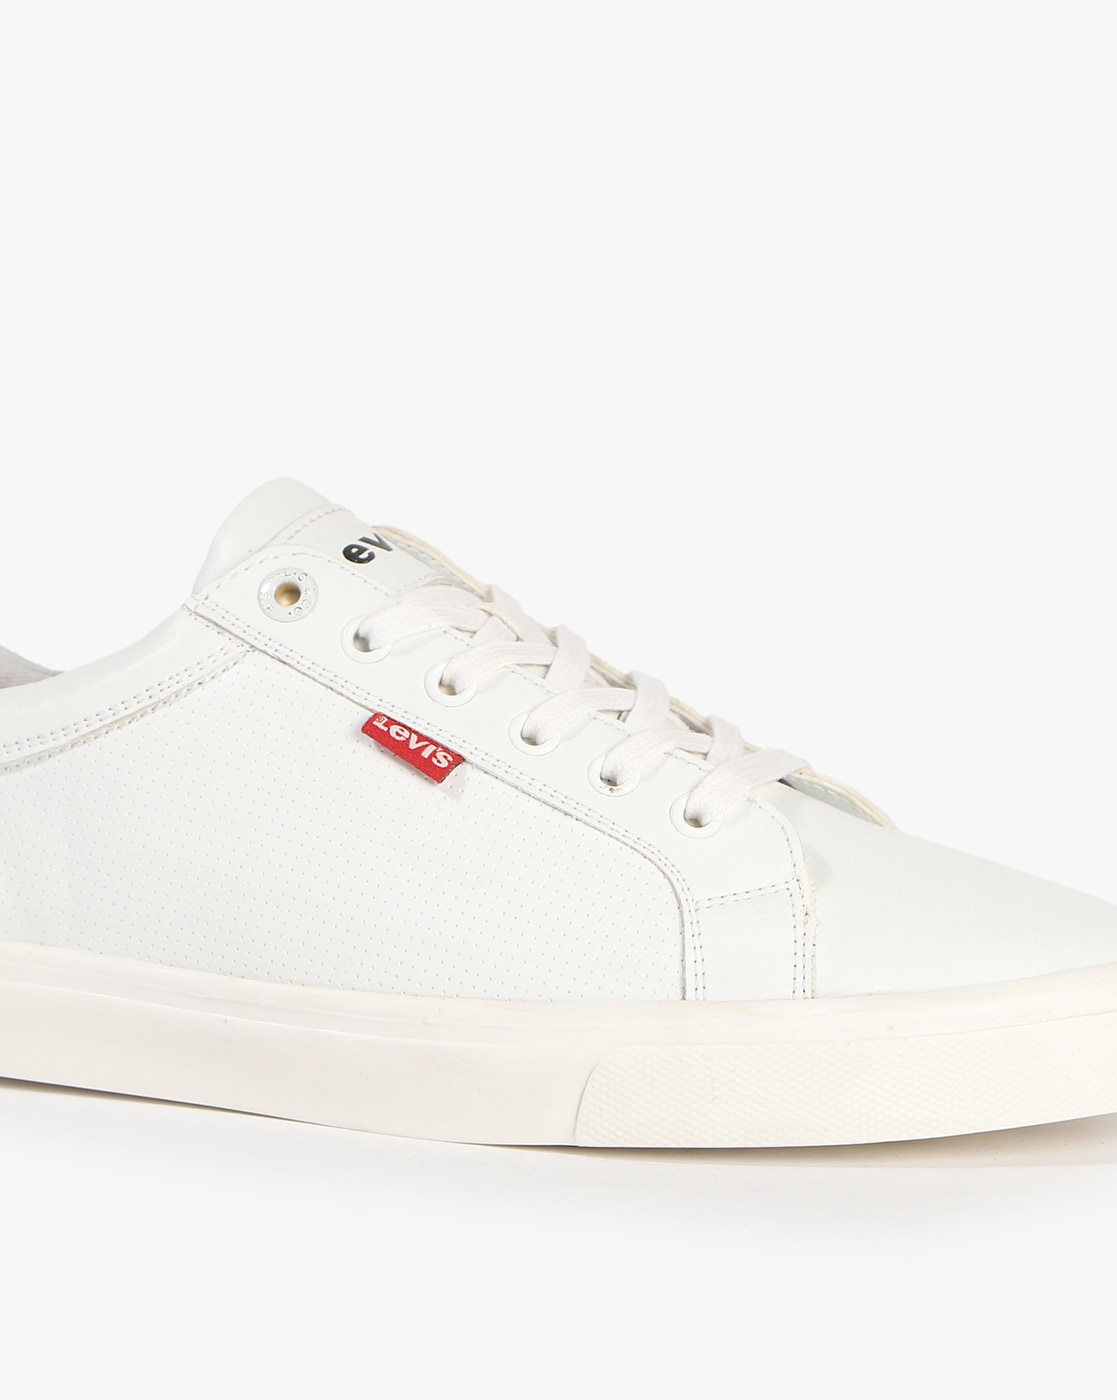 Levi's Men Shoes Sneakers Lifestyle Casual Fashion Oats Refresh Beige Levis  New | eBay